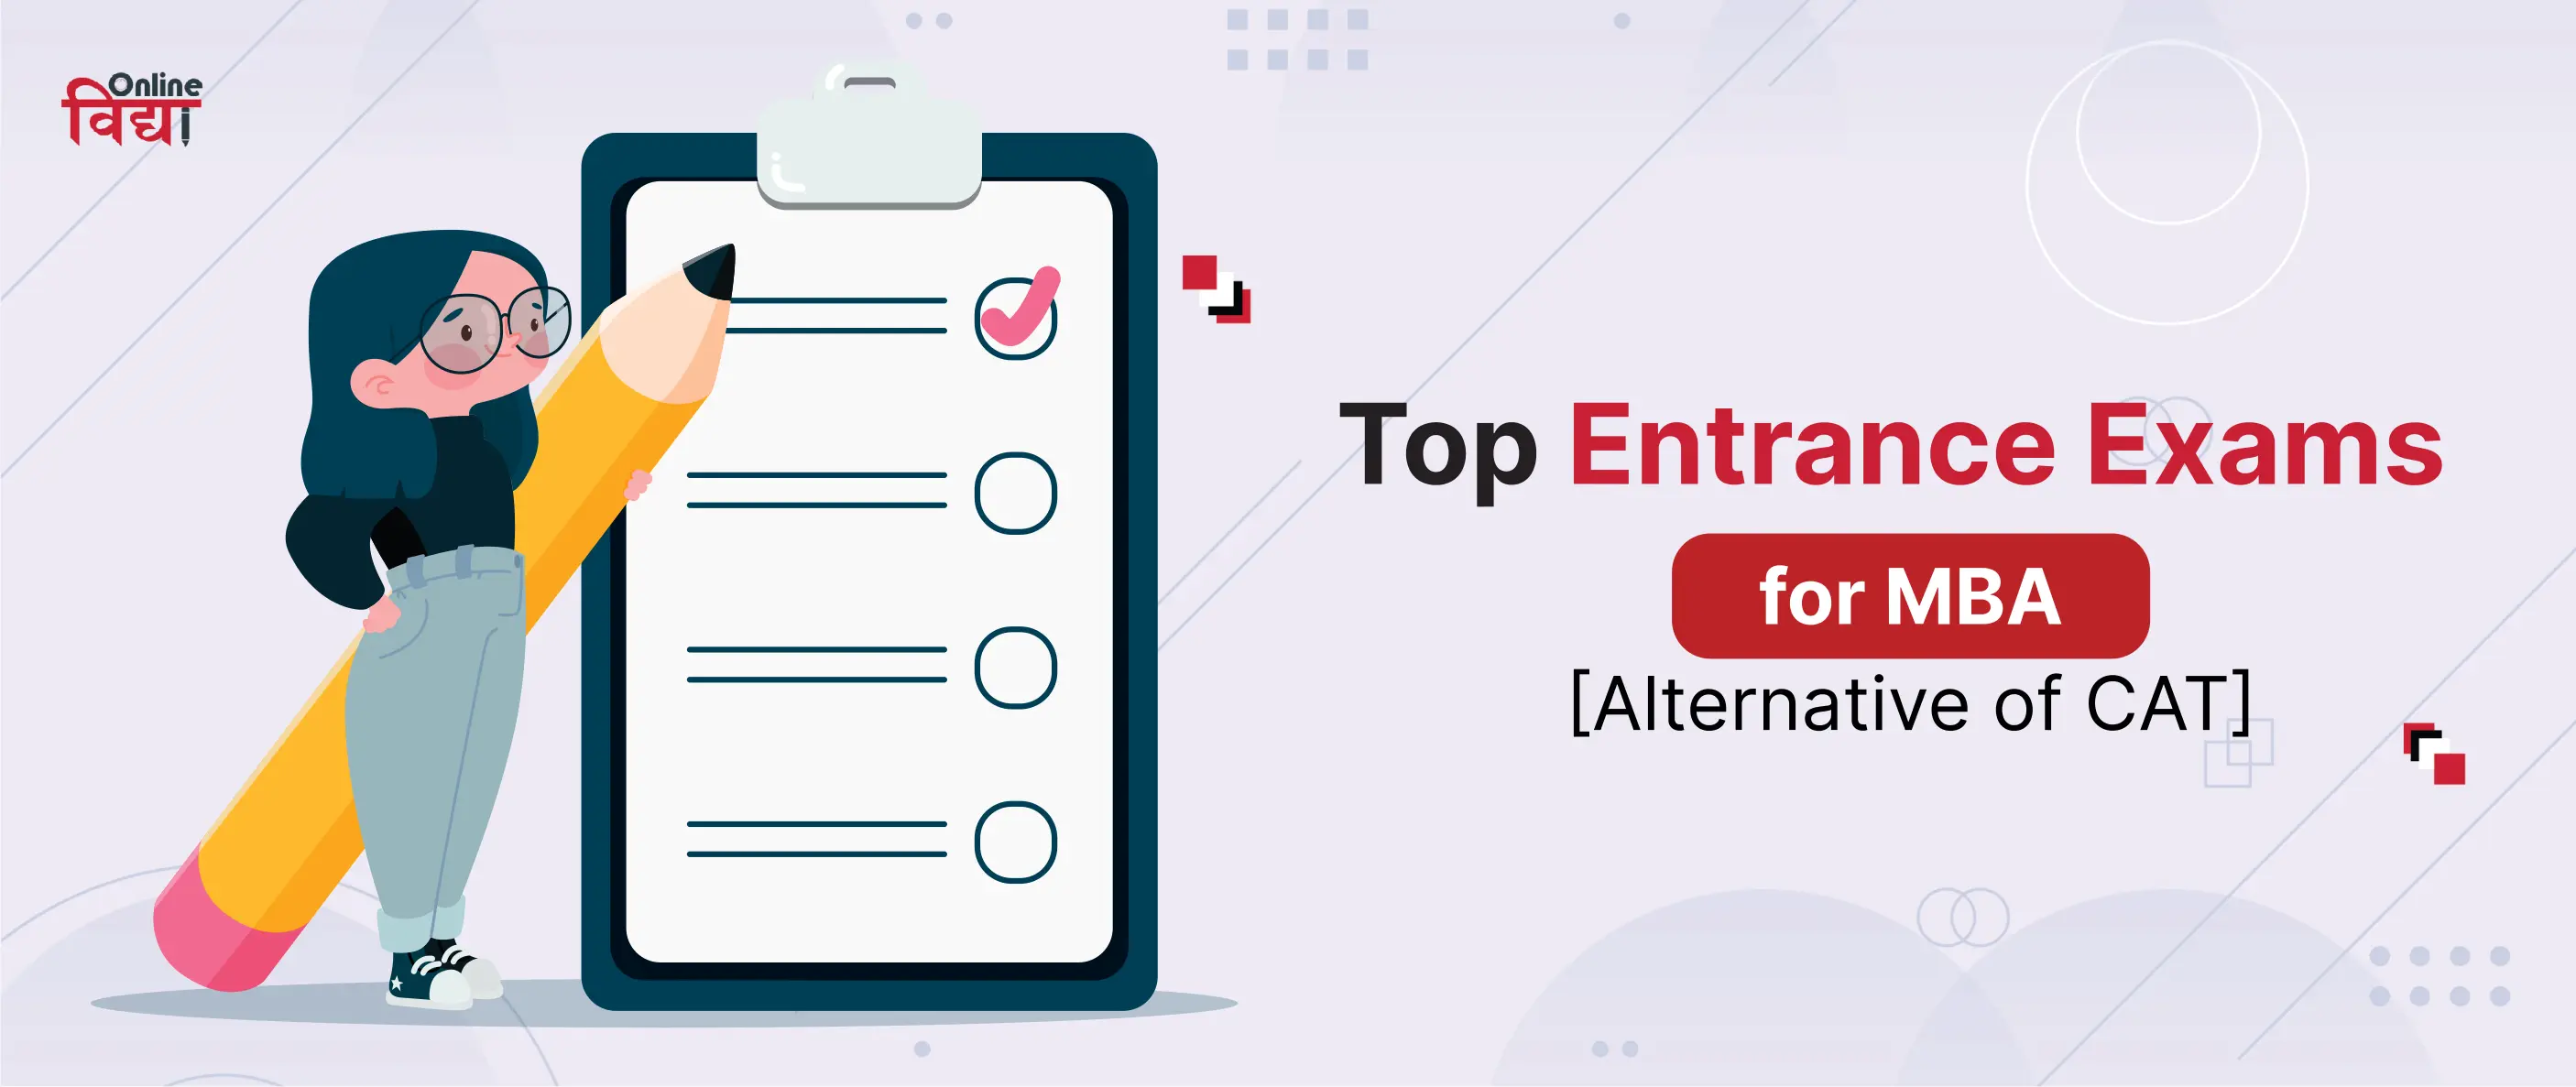 Top Entrance Exams for MBA: [Alternative of CAT]